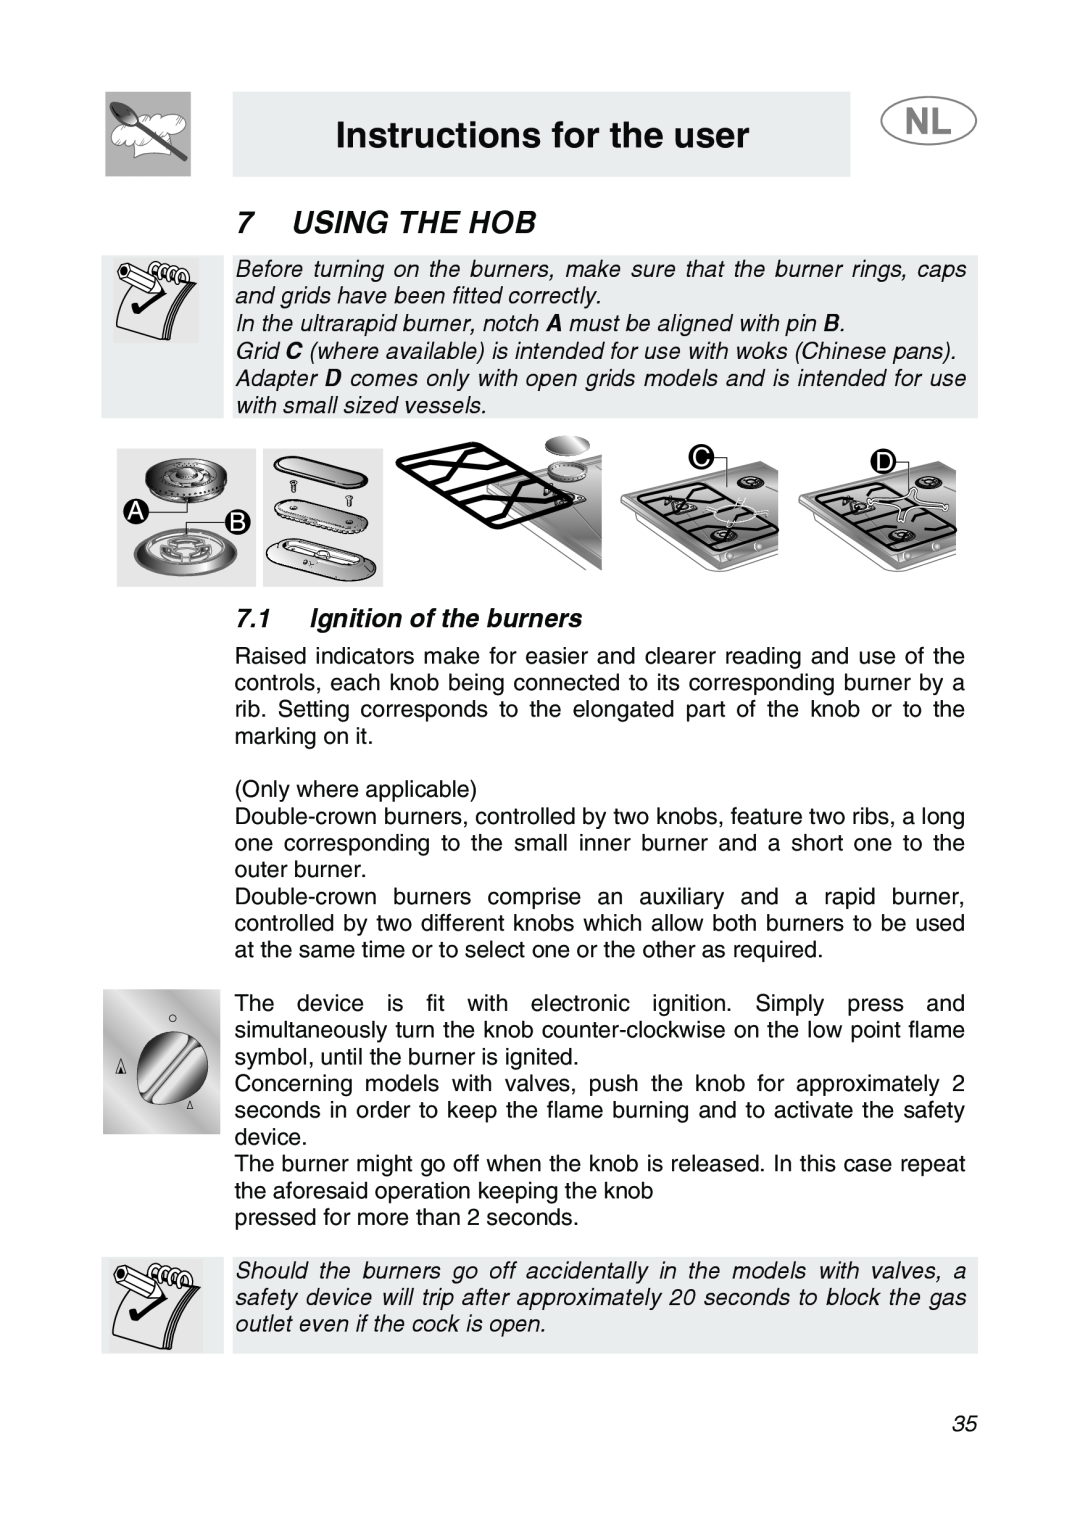 Smeg GKC755, GKCO755 manual Instructions for the user, Using The Hob, 7.1Ignition of the burners 